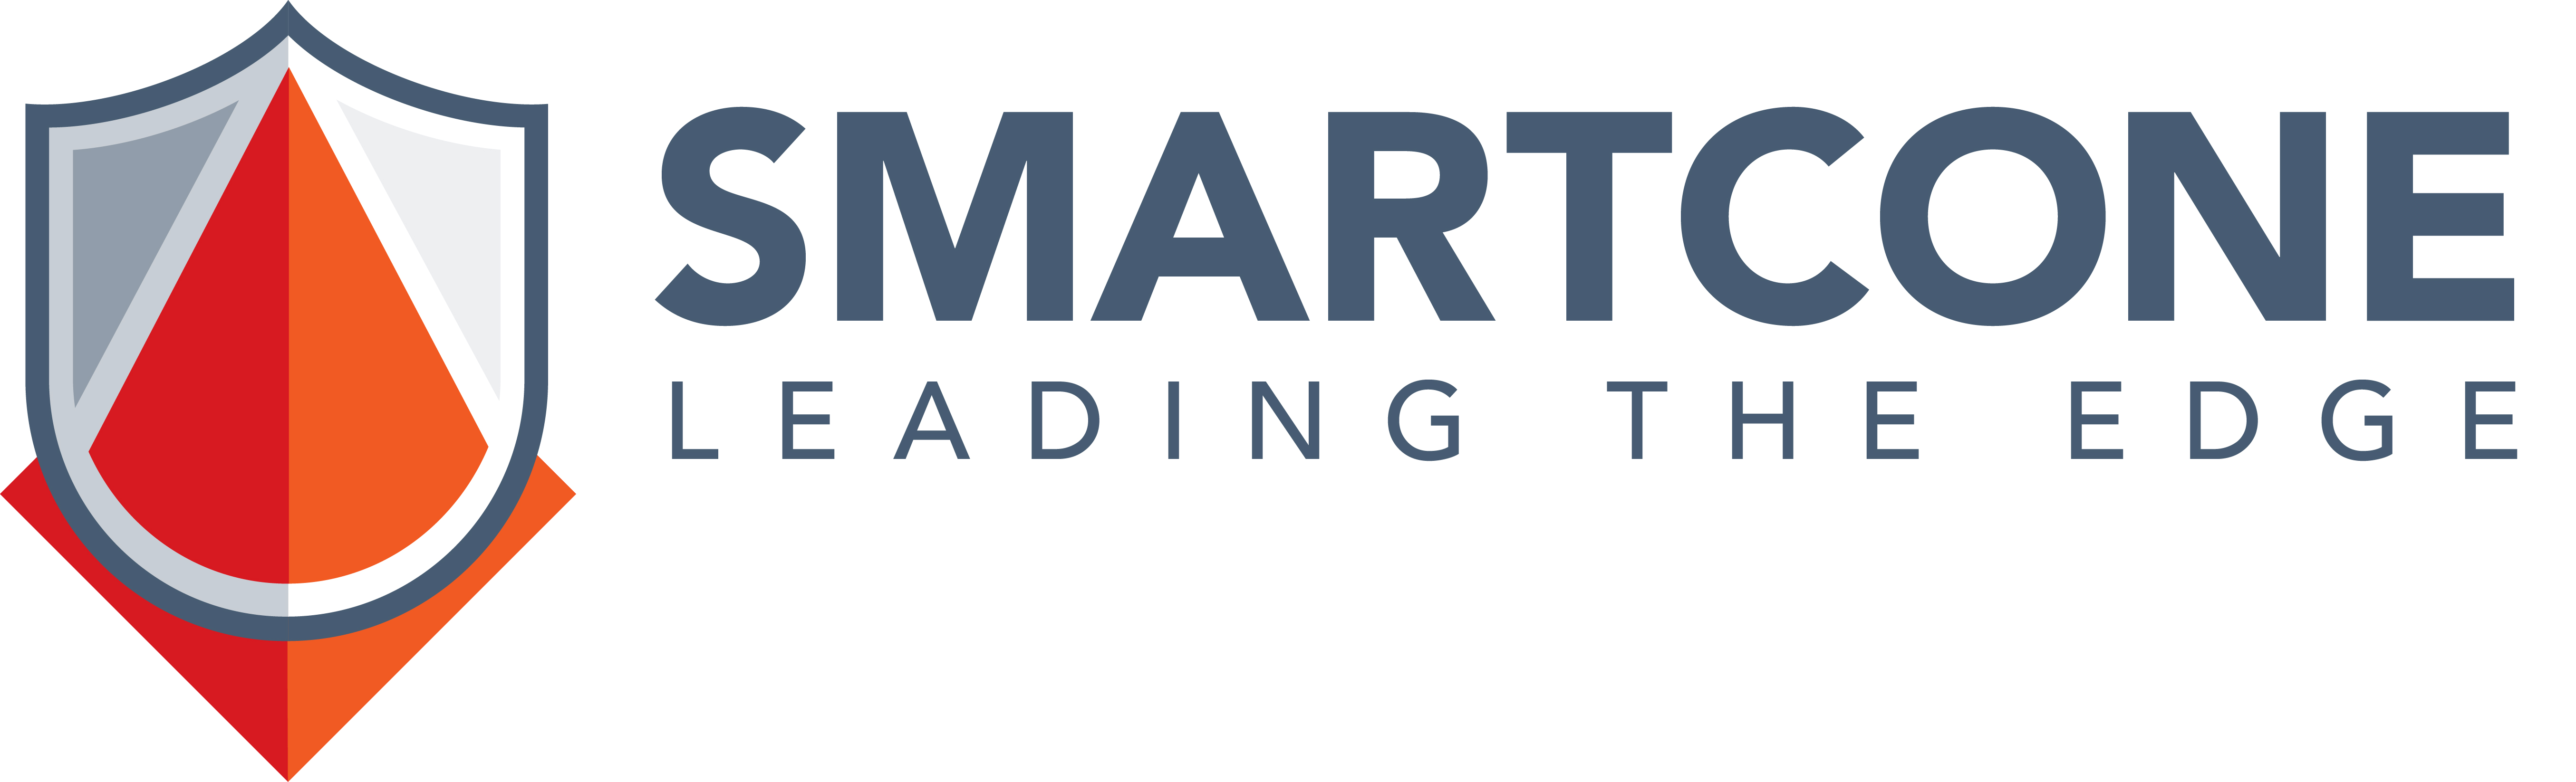 SmartCone Technologies, Inc., Thursday, July 16, 2020, Press release picture